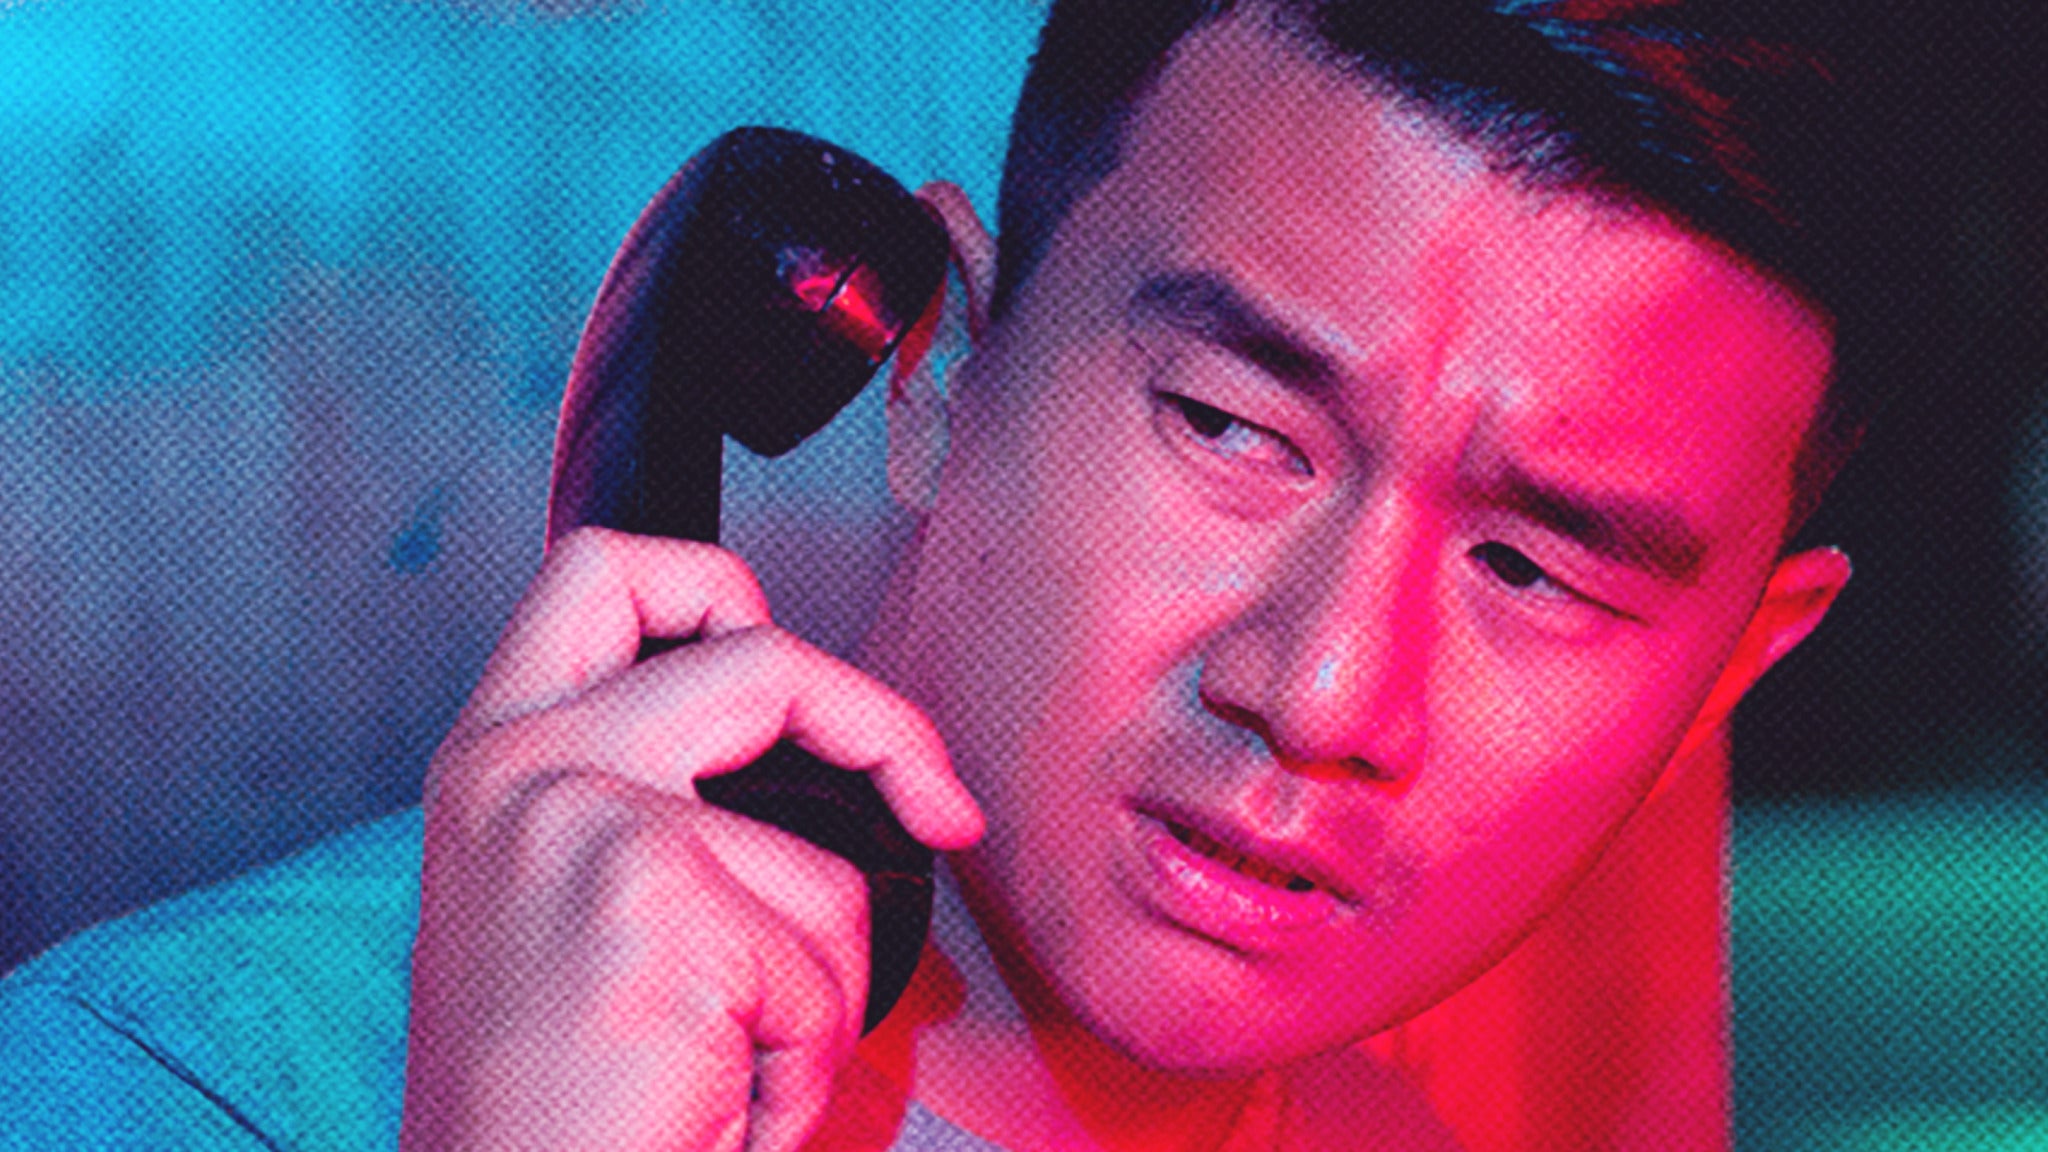 Ronny Chieng in Seattle promo photo for Local presale offer code